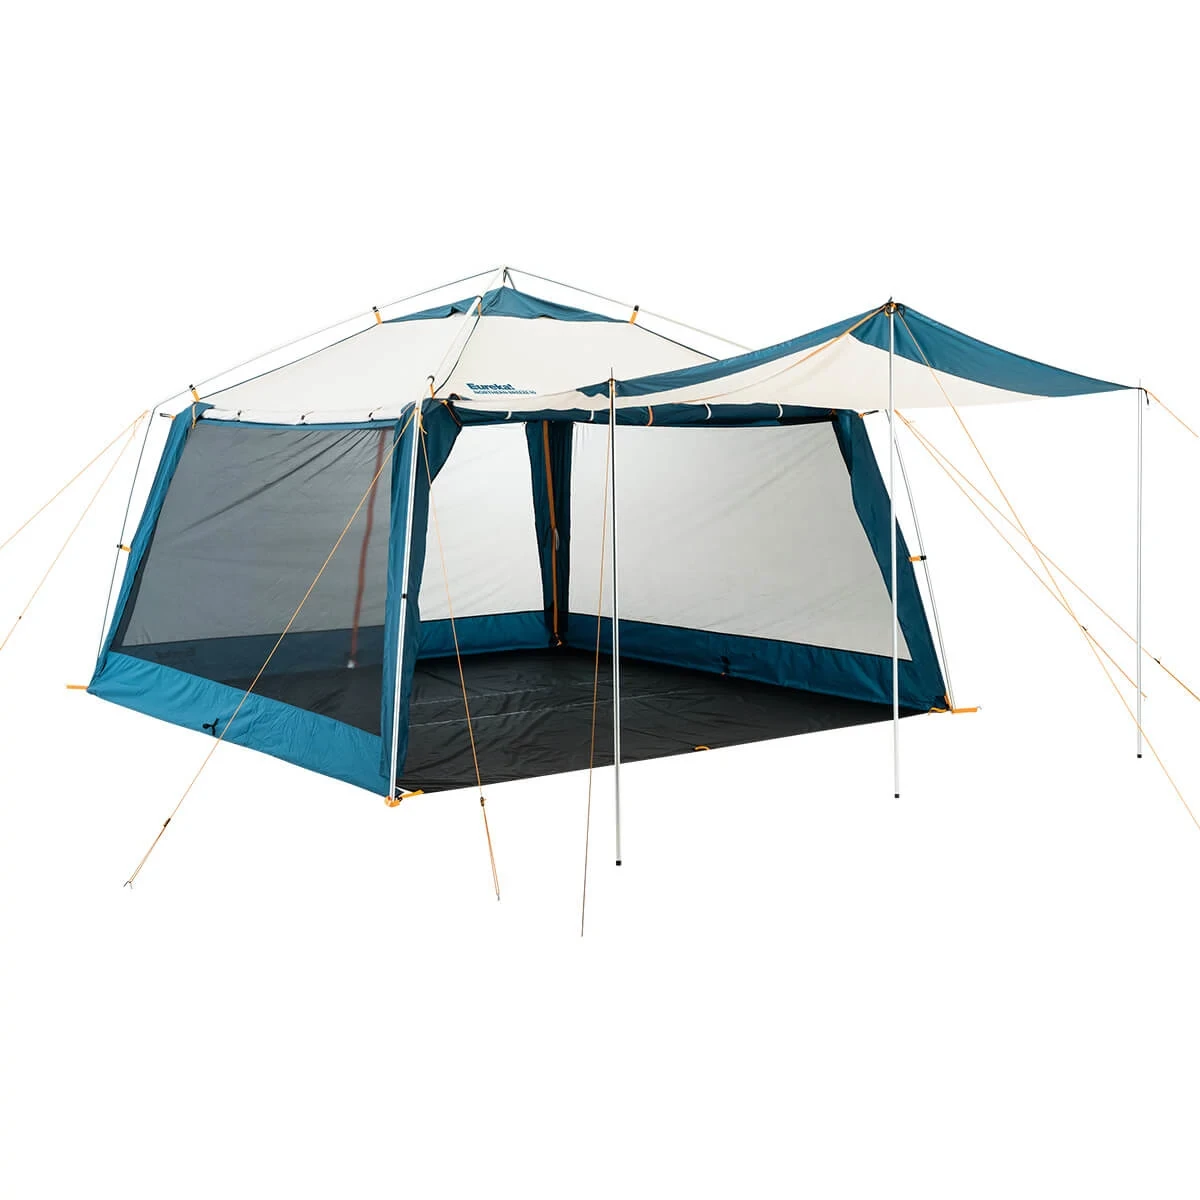 Northern Breeze 10 Screen House with front awning